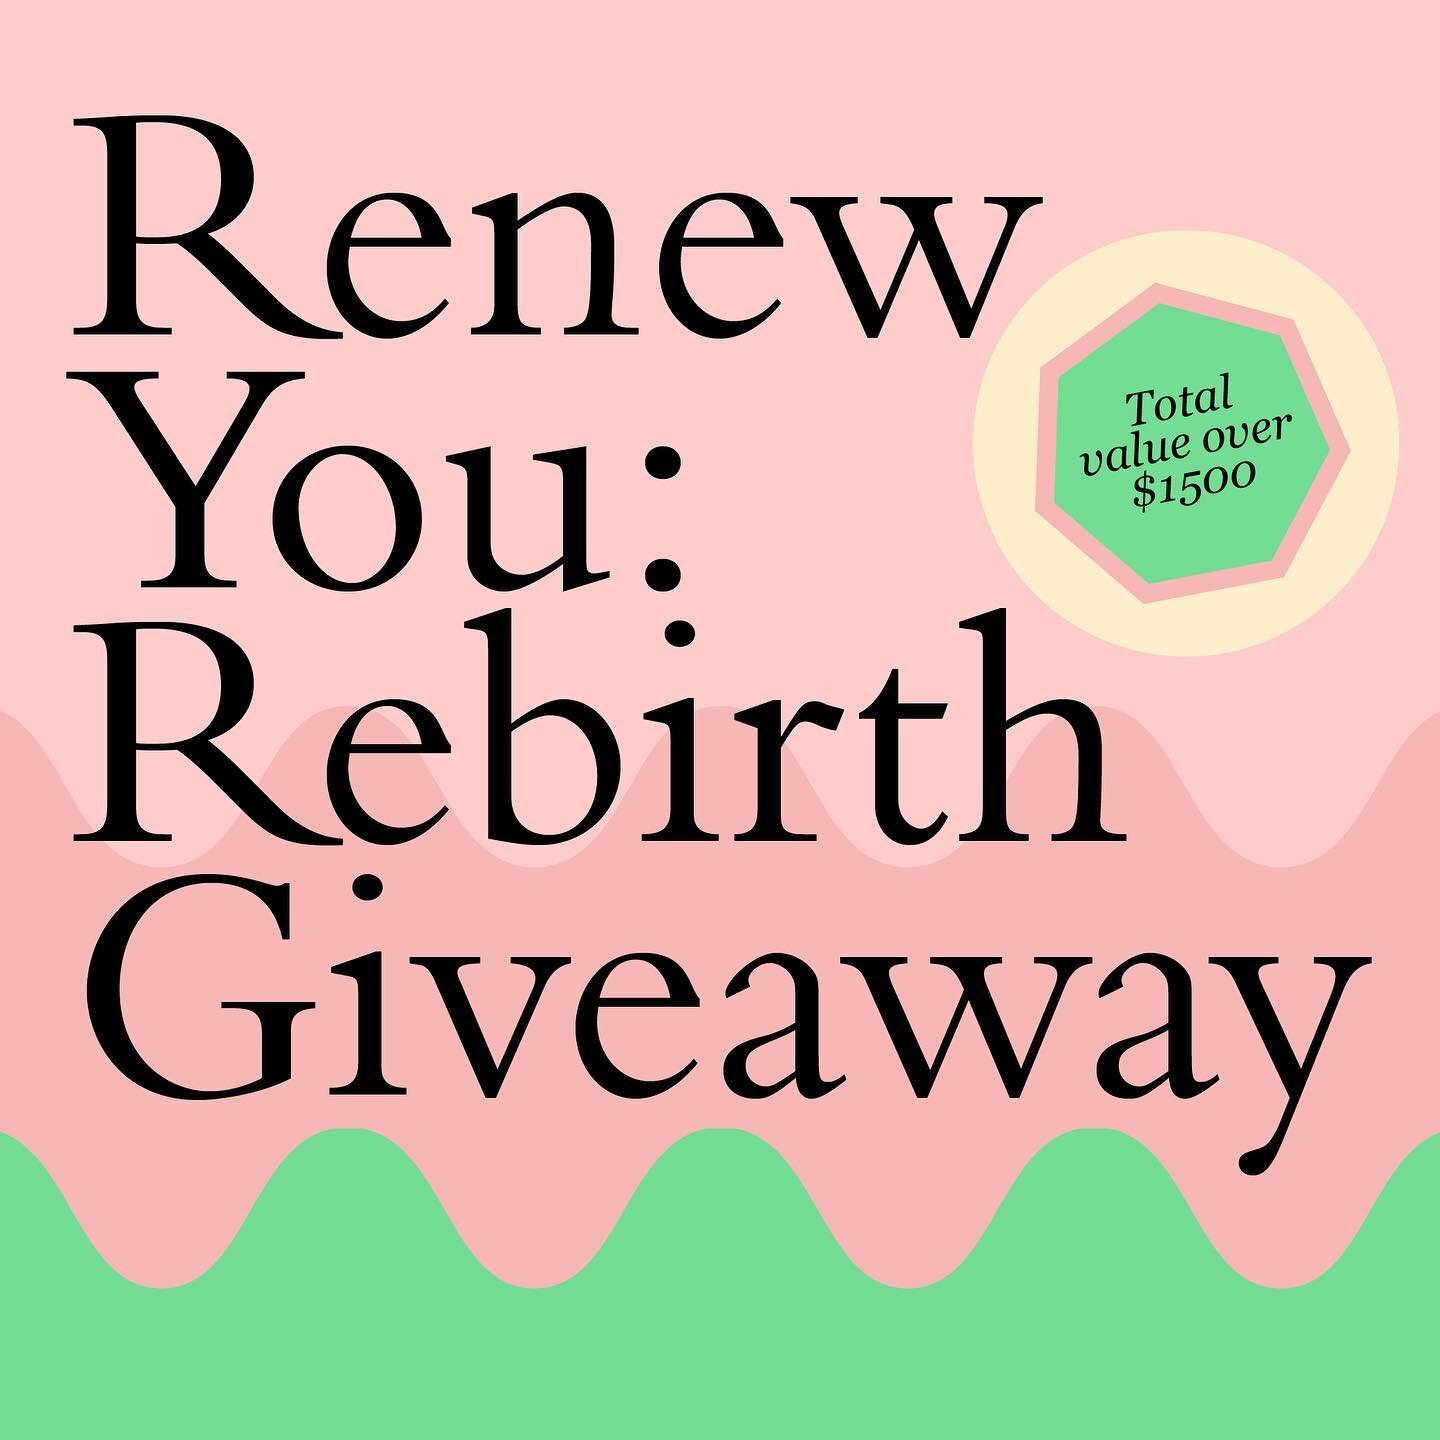 Welcome to our Renew You: Rebirth Giveaway with prizes totaling over $1500. We're keeping it simple - it only takes an email to enter. One lucky winner will be selected at random and will receive an incredible prize pack from the below c@nna favorite